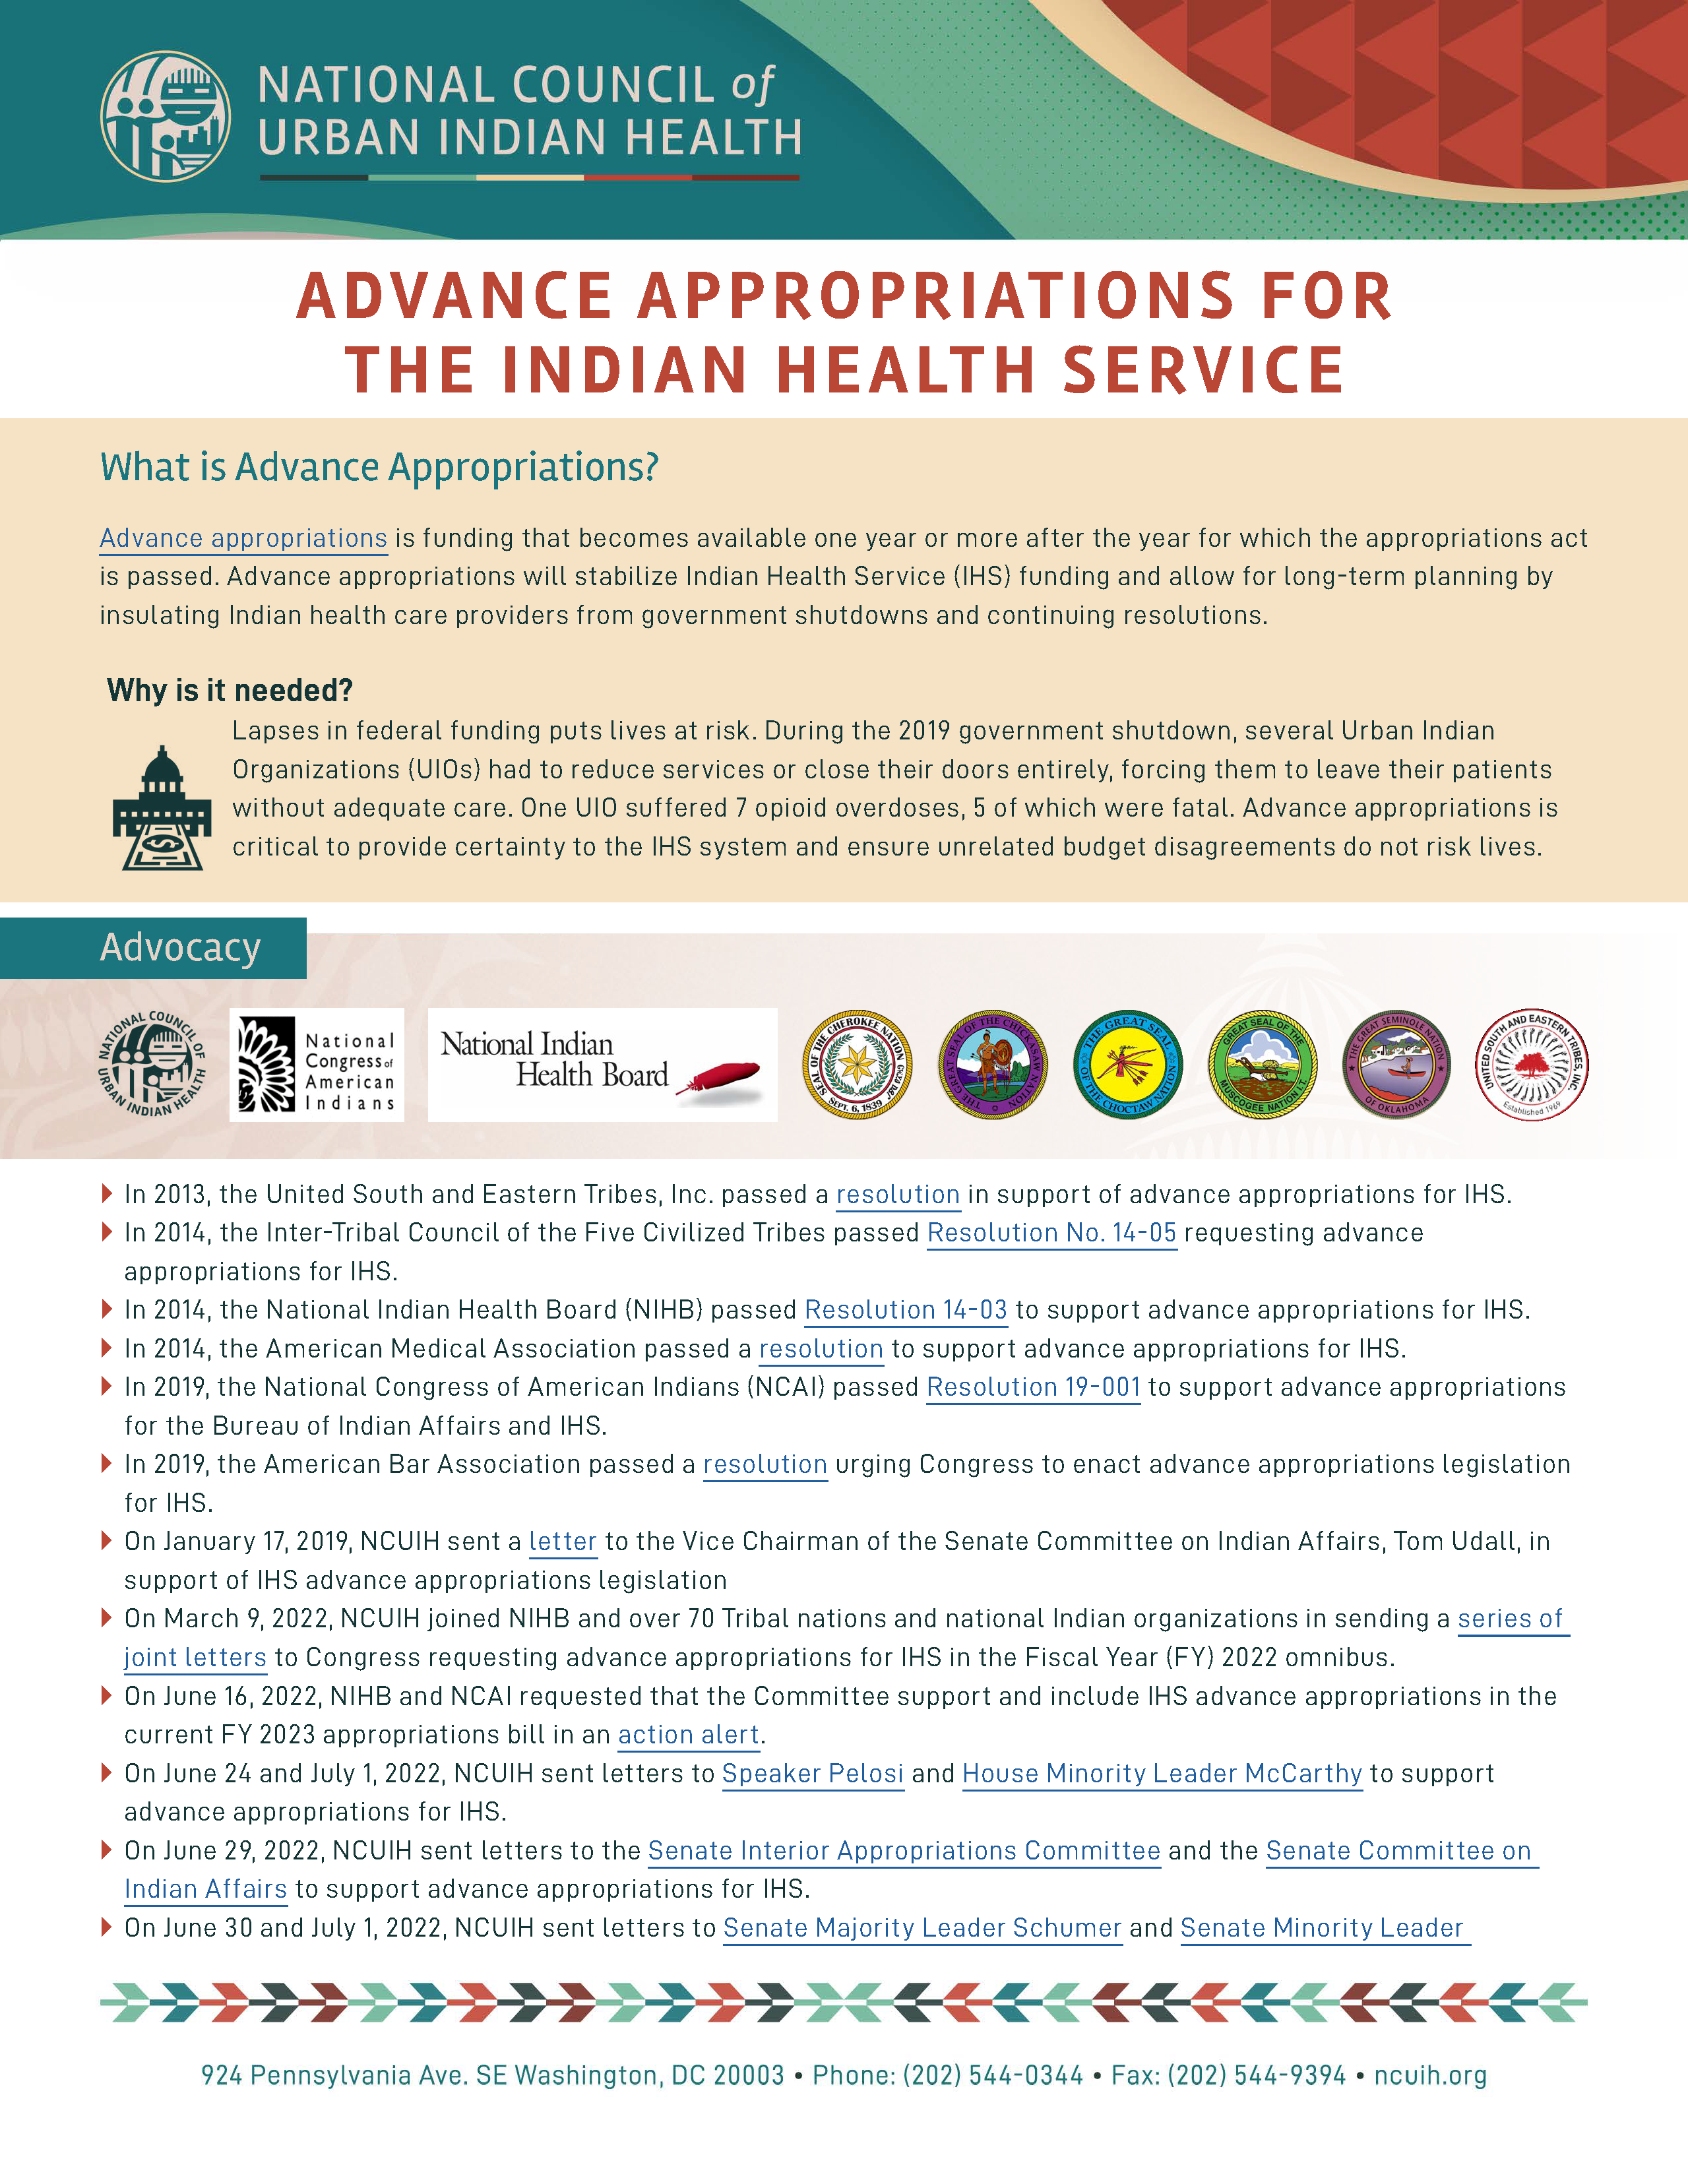 Advance Appropriations for The Indian Health Service